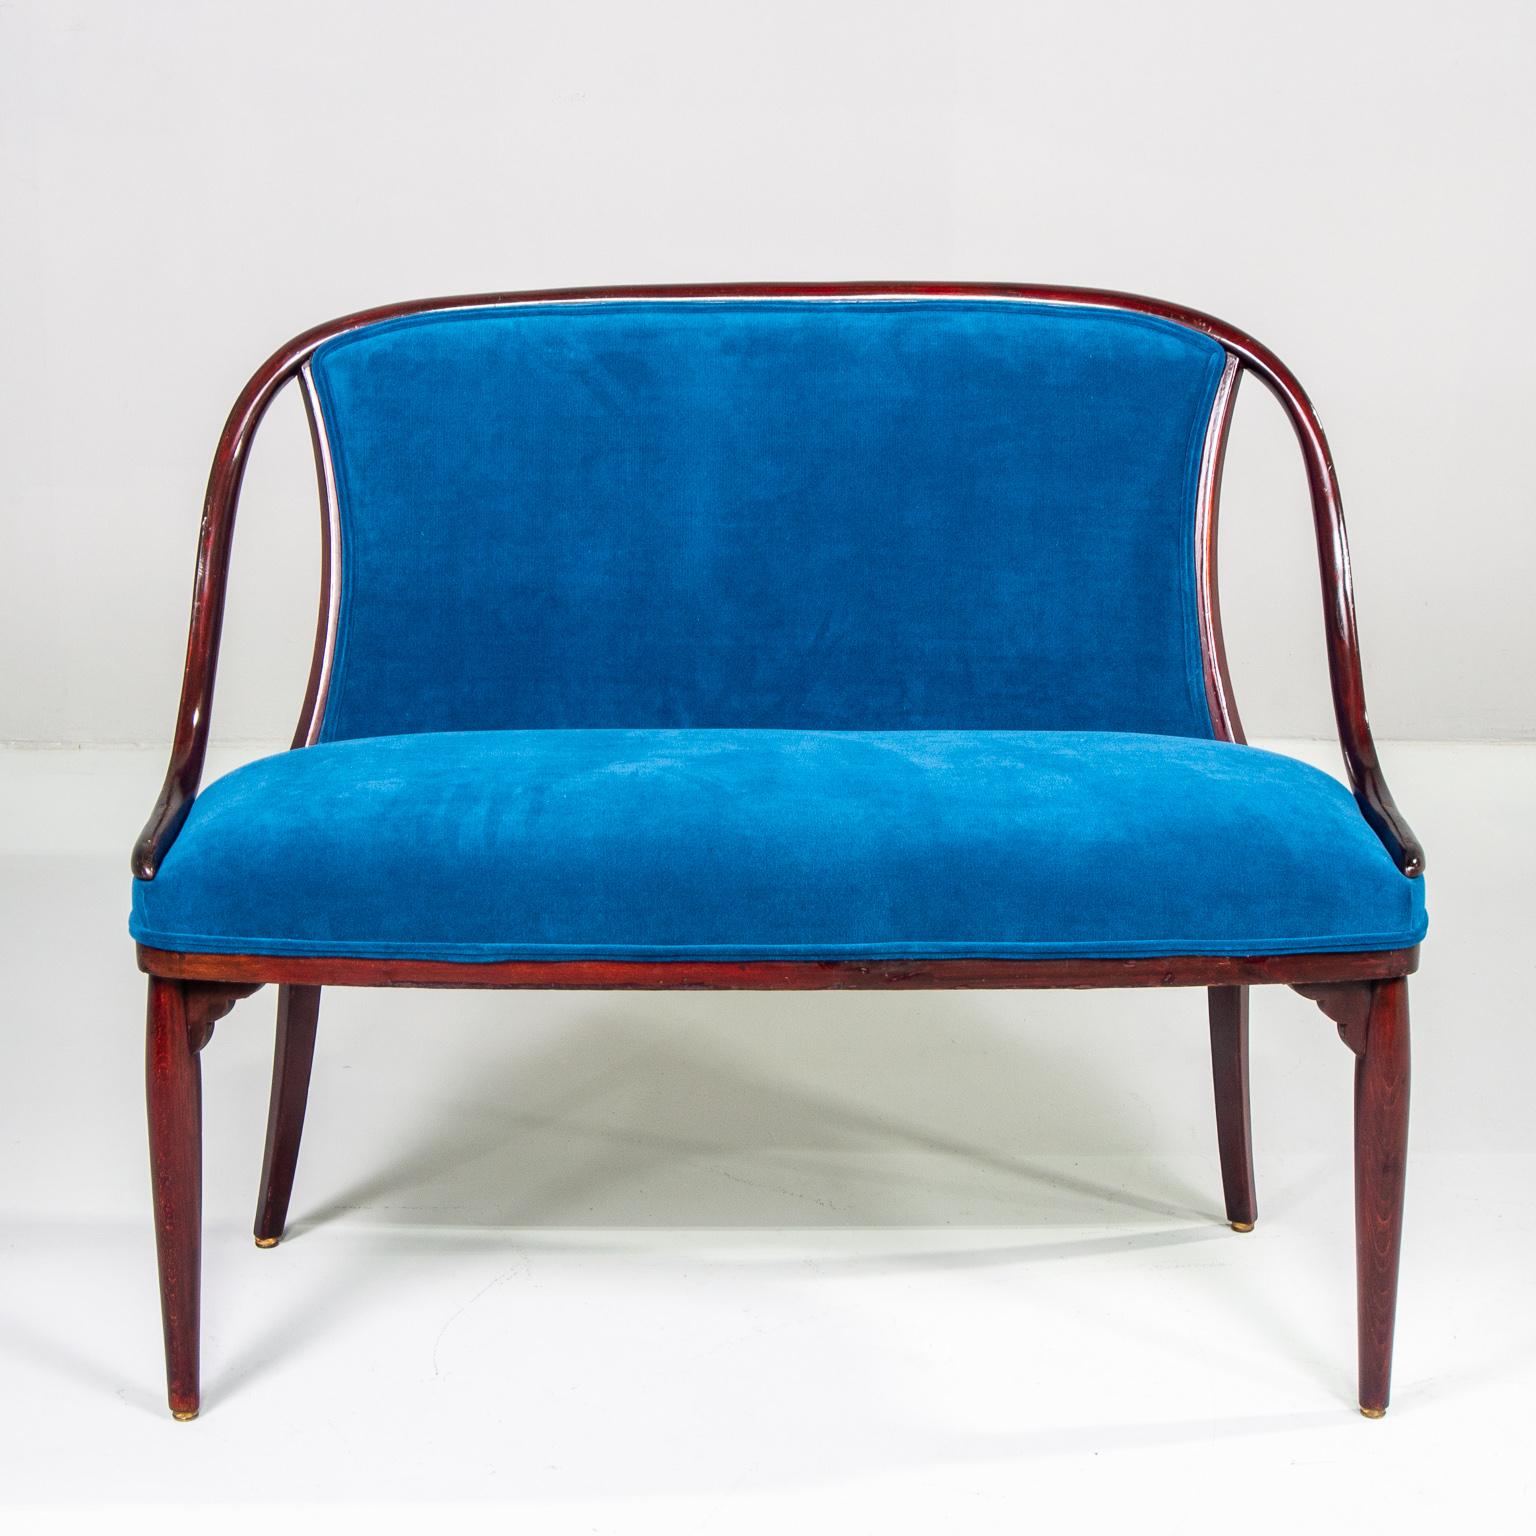 Thonet upholstered settee with dark wood frame and newly upholstered in teal blue colored velvet. Measures: Arms are 22.25” high and seat is 19.25” high and 20.25” deep, circa 1930s.



 